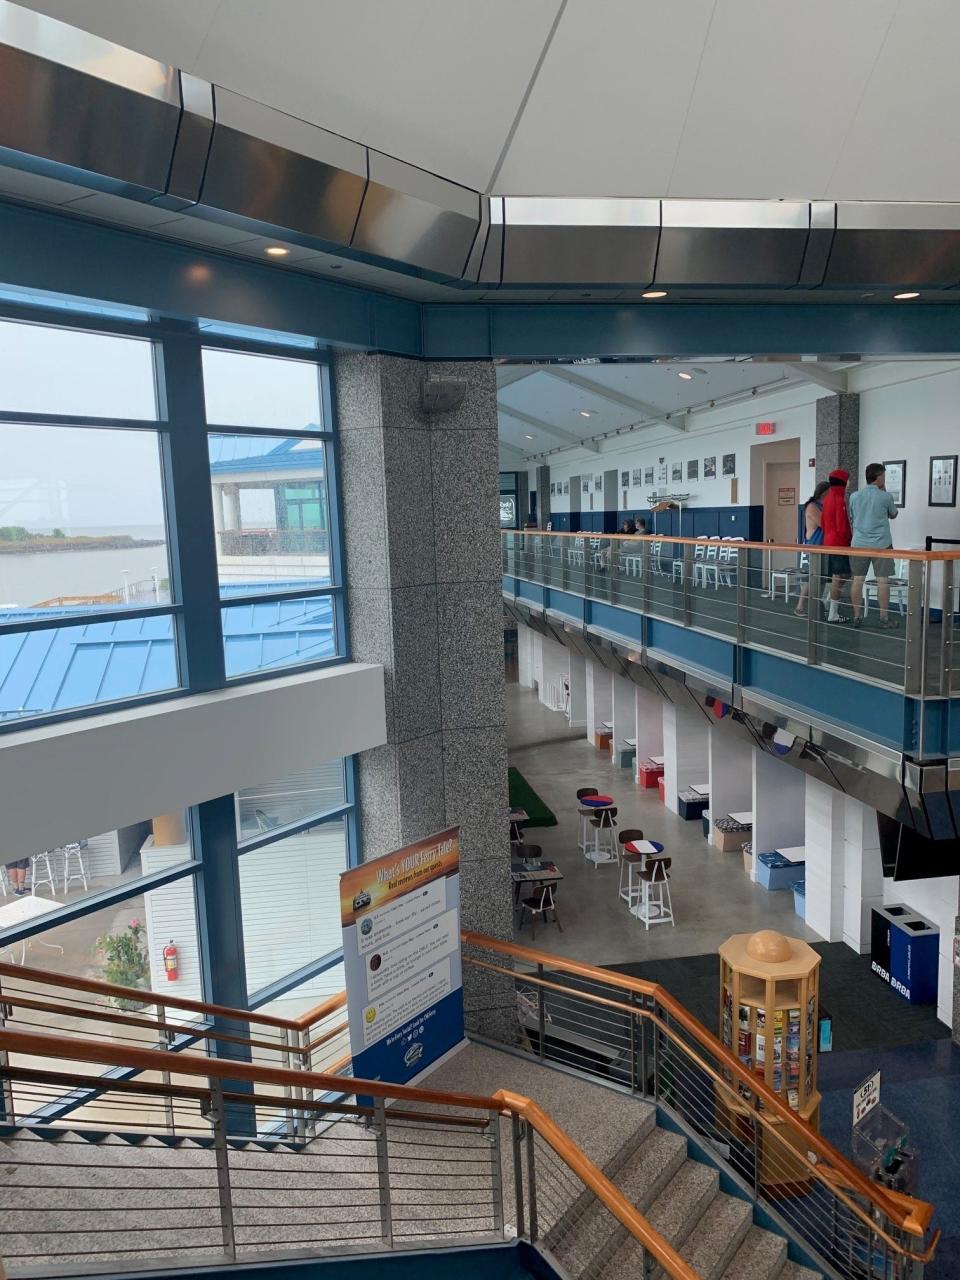 A view of the interior of Ferry Park, the Cape May terminal for the the Cape May-Lewes Ferry. The terminal's amenities include an art gallery, gift shop and multiple dining options in season.